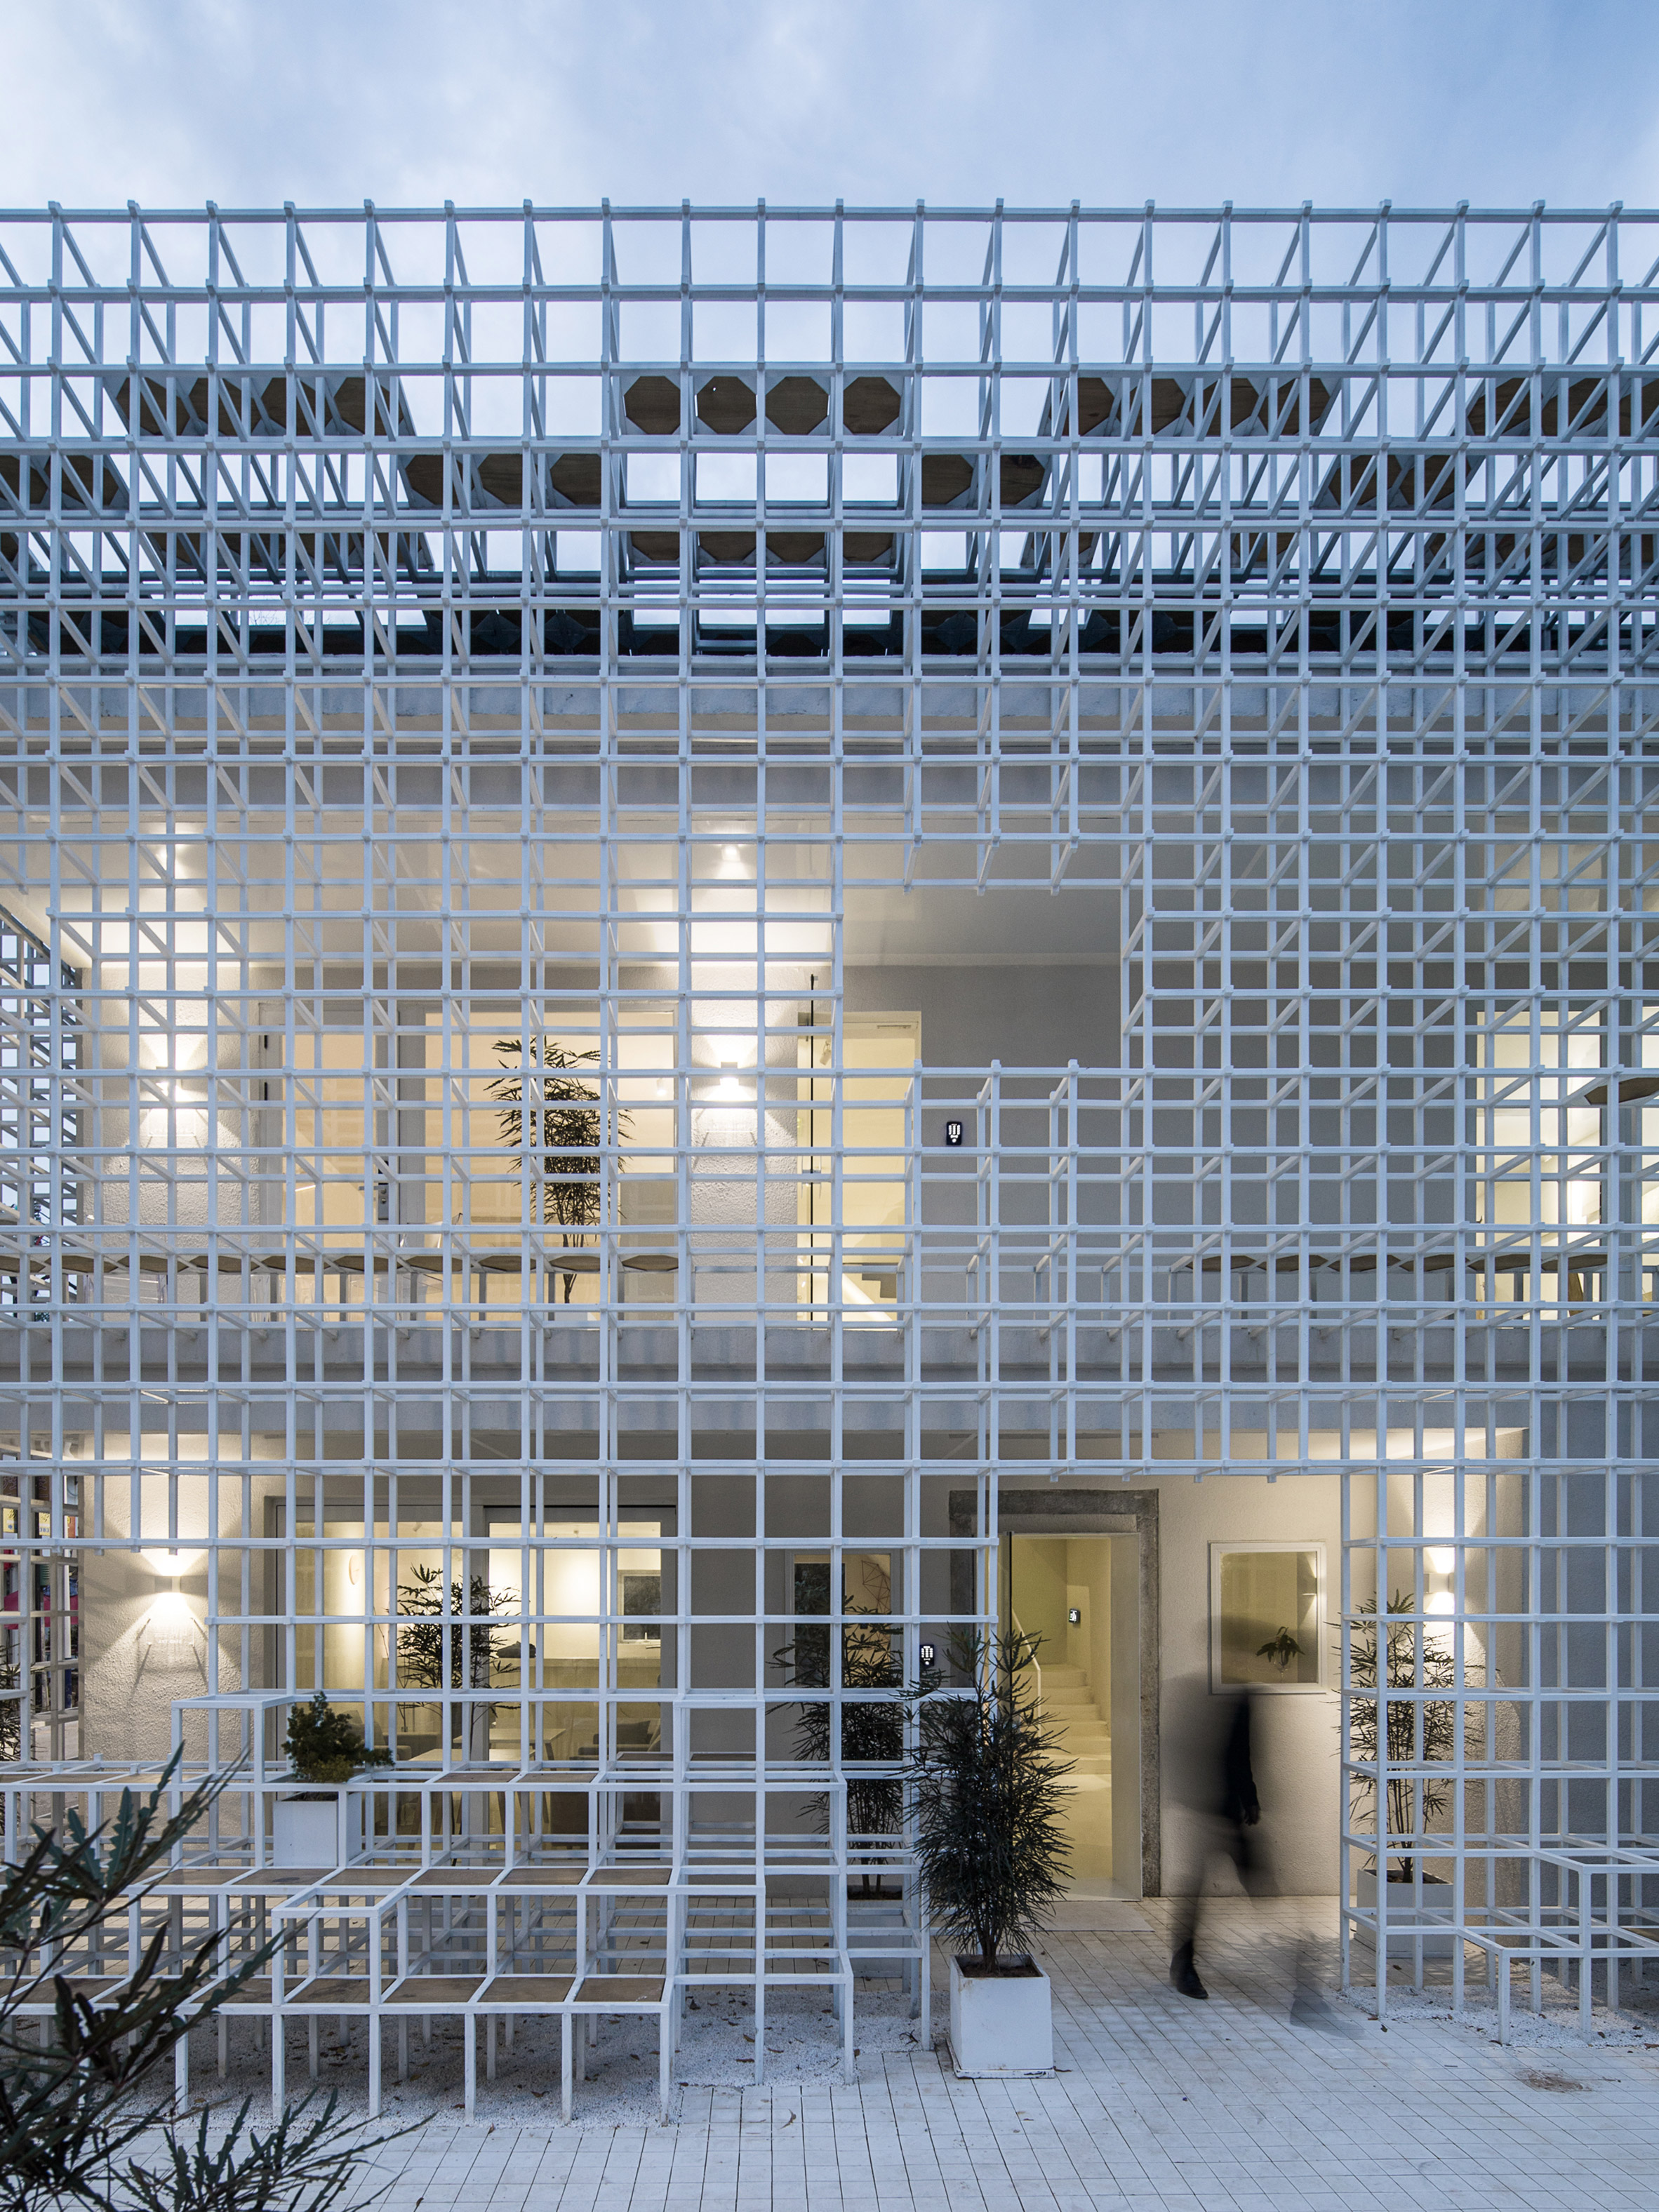 Latticed framework incorporates seating around the edges of Shenzhen hotel and cultural centre